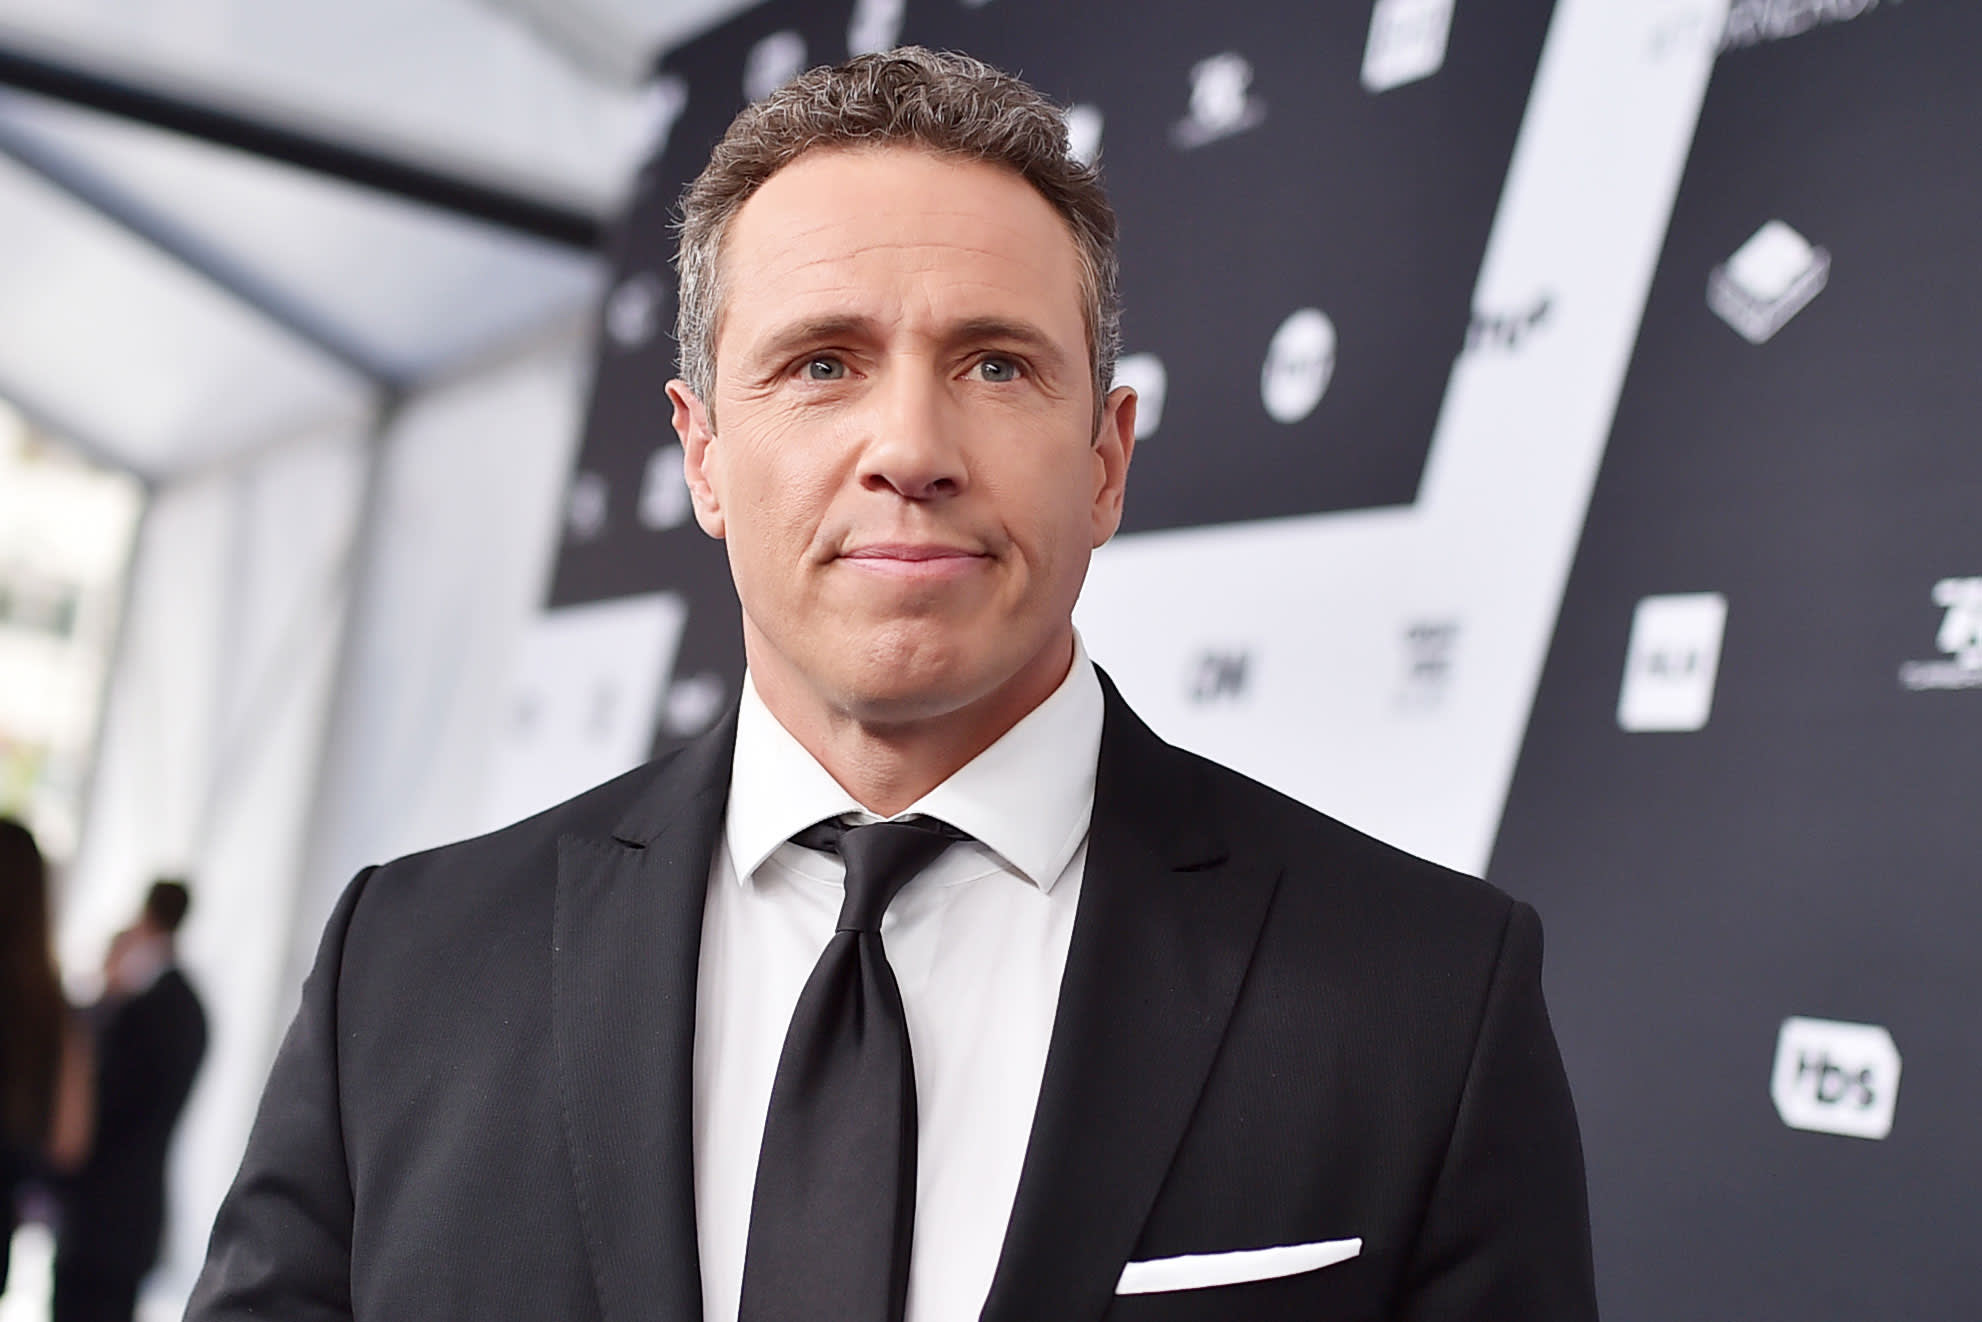 Chris Cuomo says he’s ending his SiriusXM radio show after CNN fired him